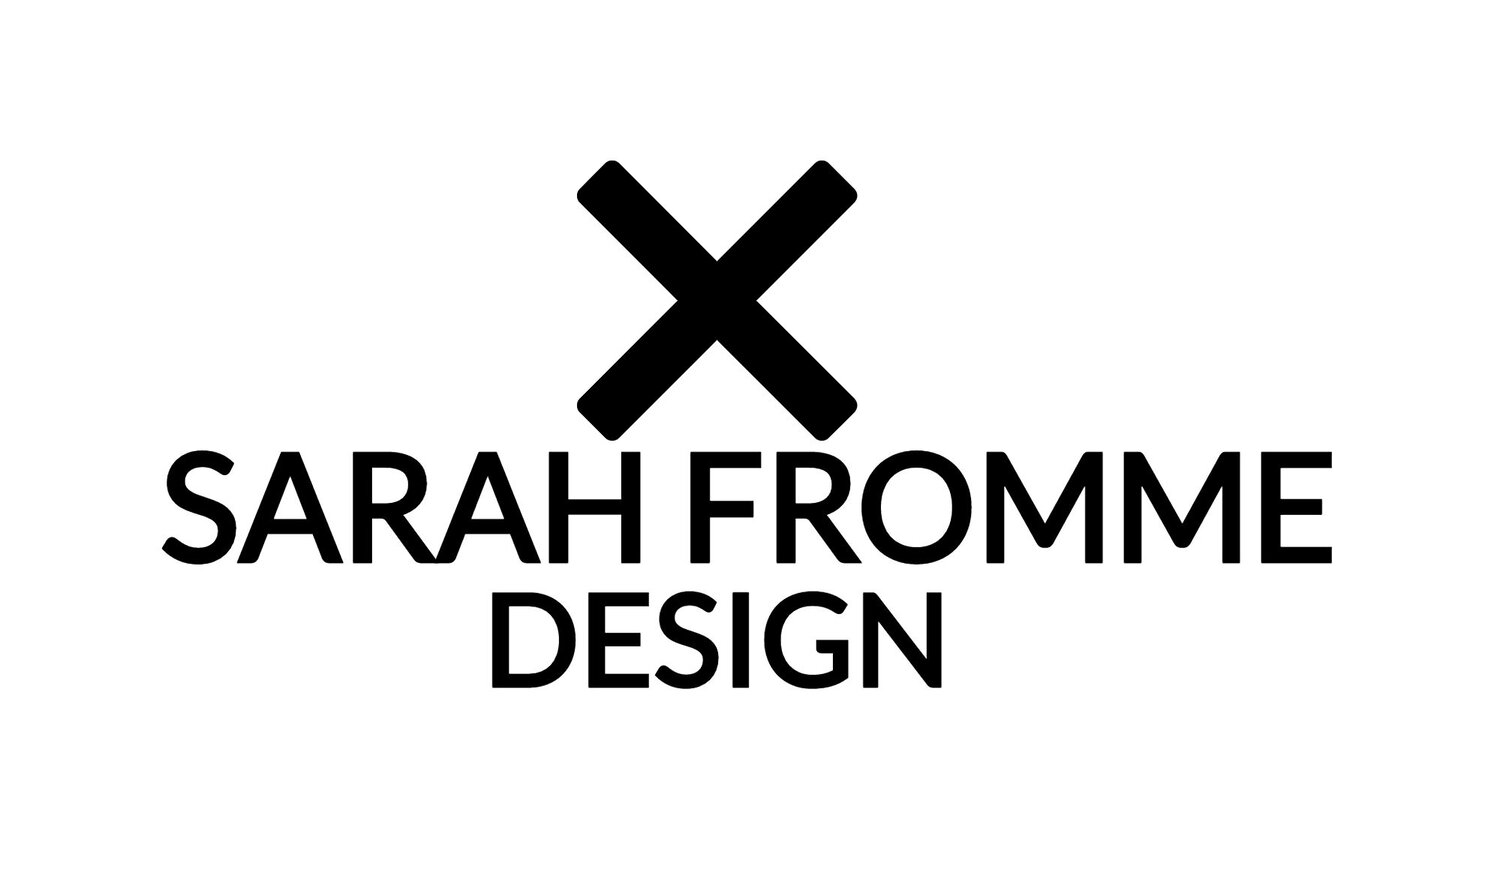 SARAH FROMME DESIGN